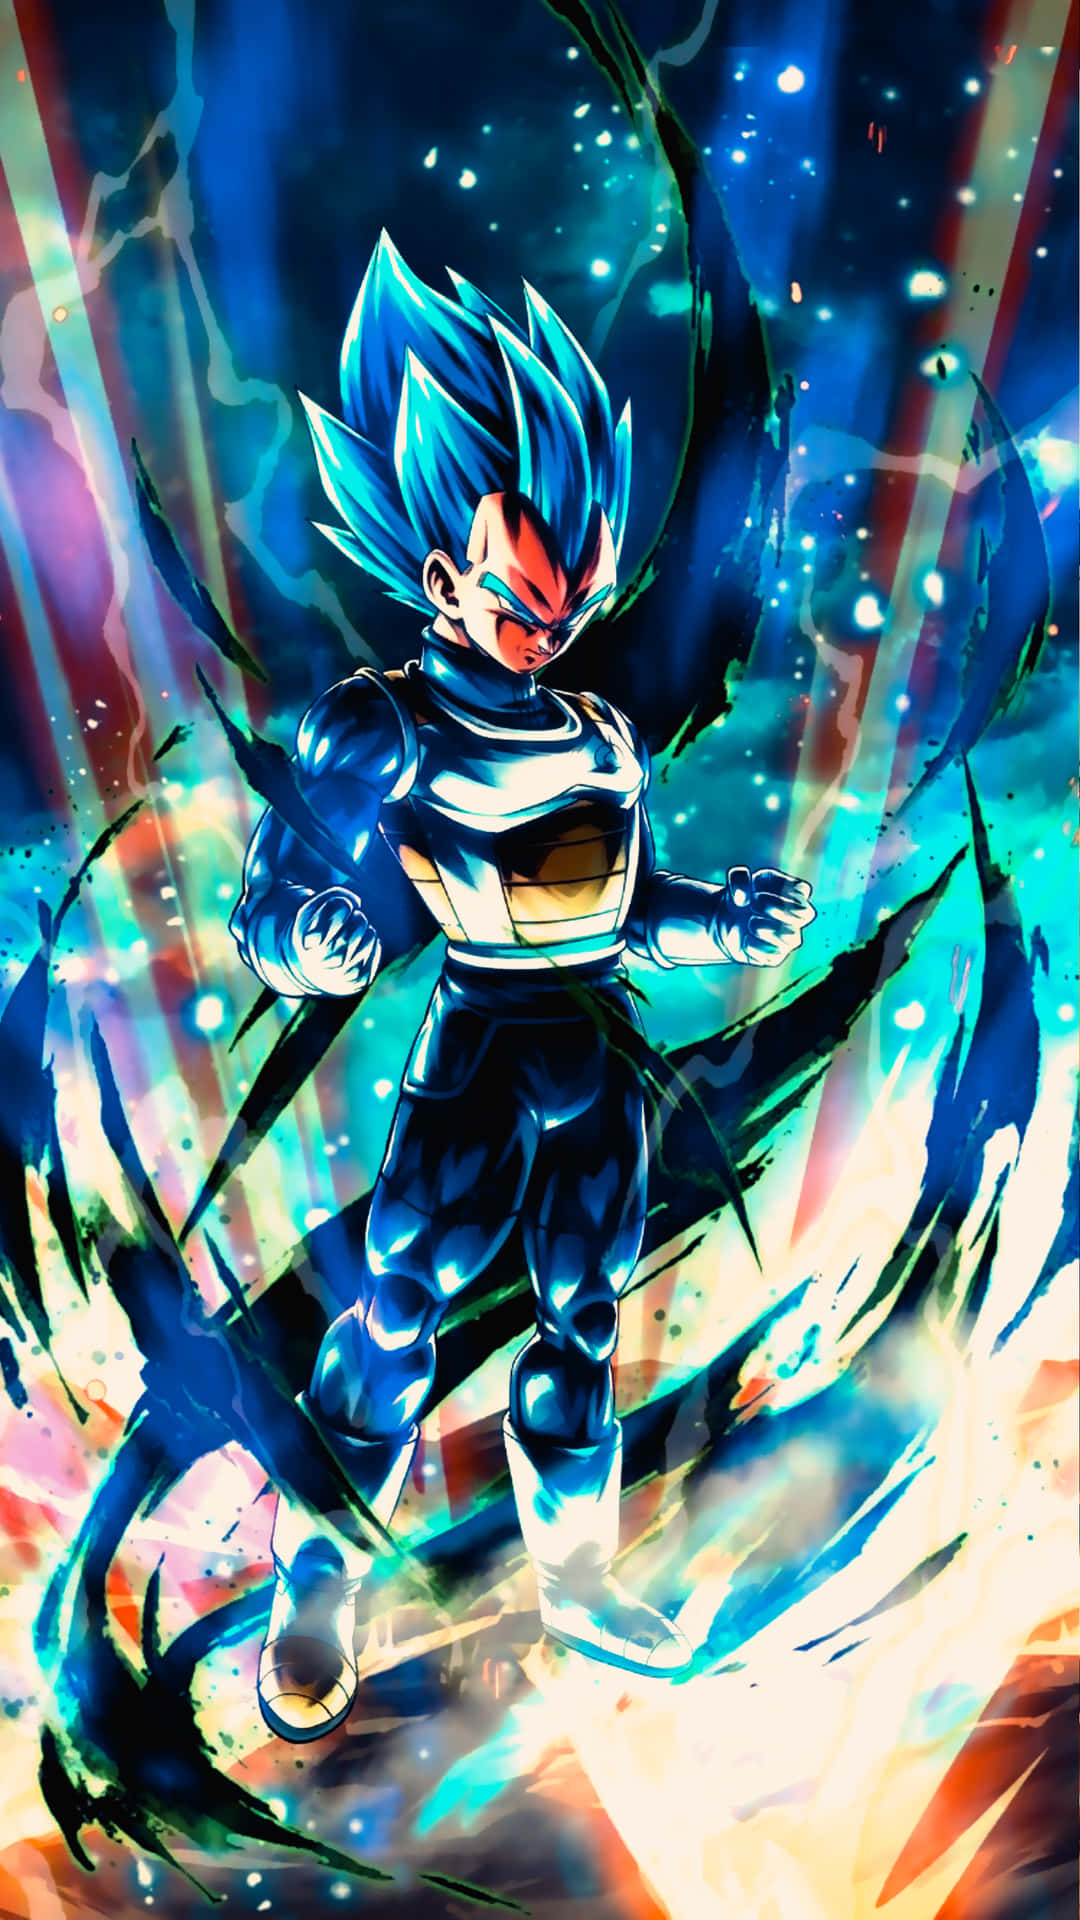 The Cool and Cunning Vegeta Wallpaper